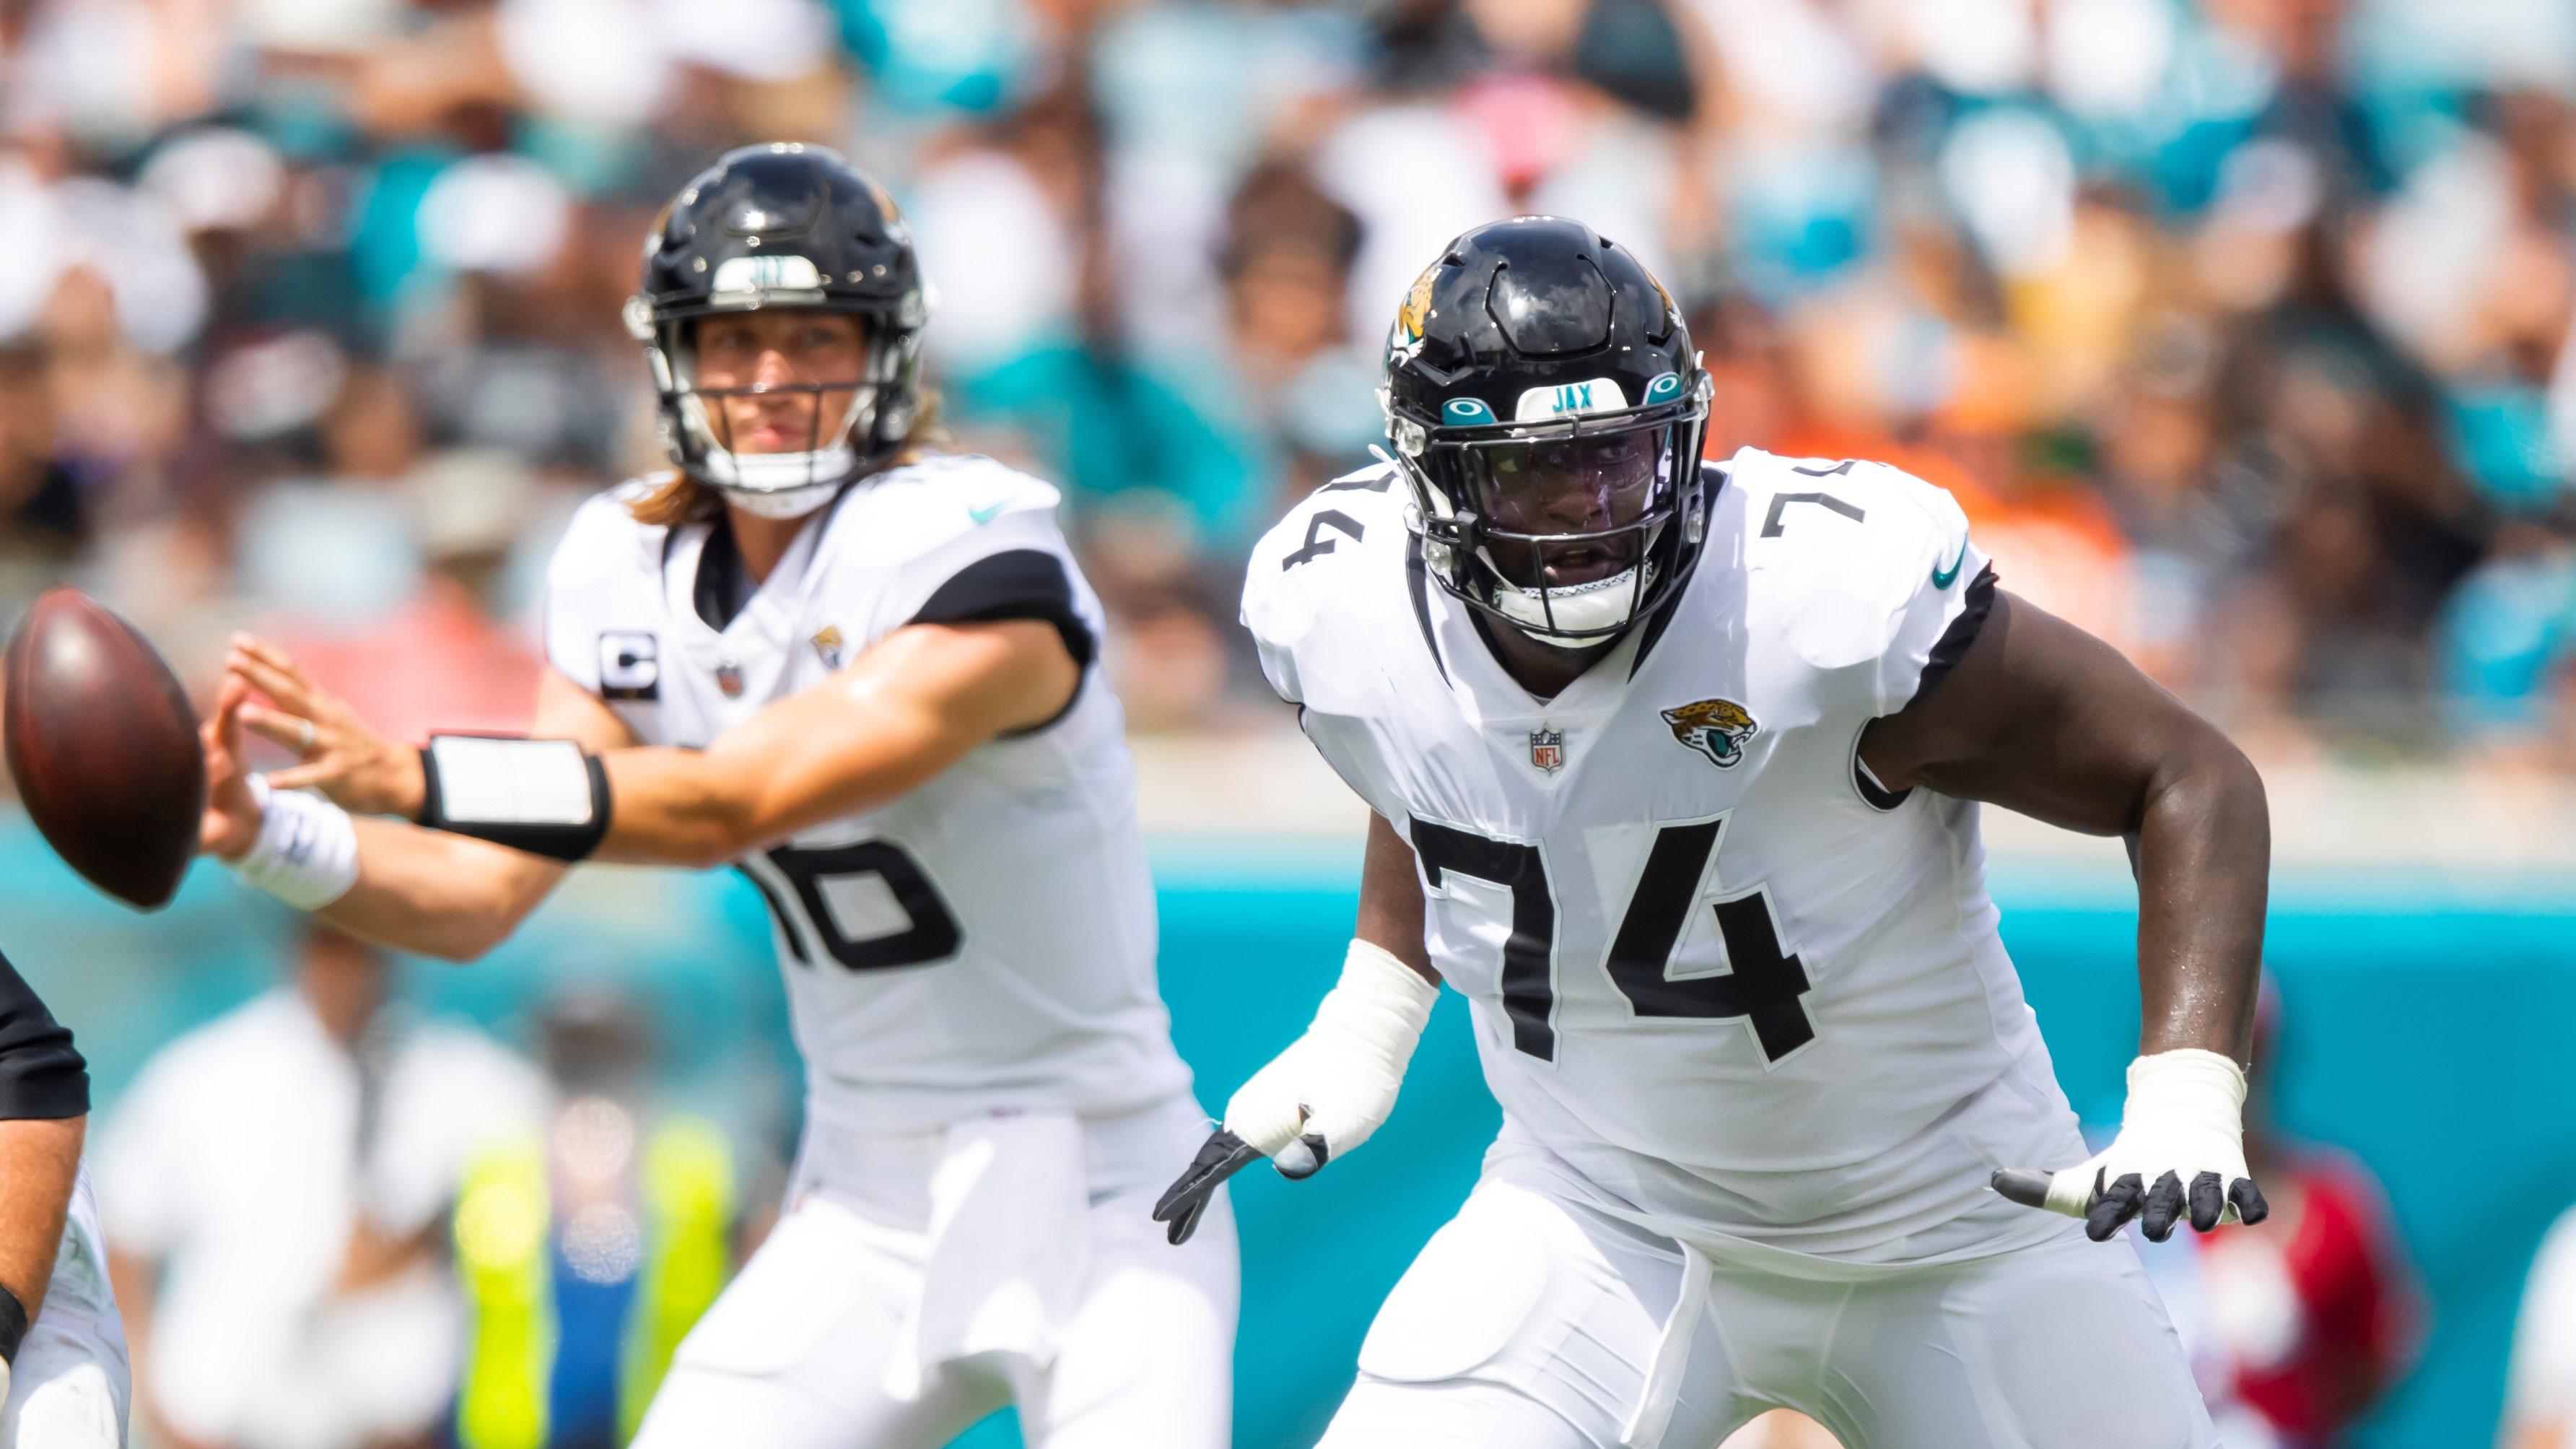 Jacksonville Jaguars offensive tackle Cam Robinson (74) against the Denver Broncos at TIAA Bank Field. / Mark J. Rebilas-USA TODAY Sports